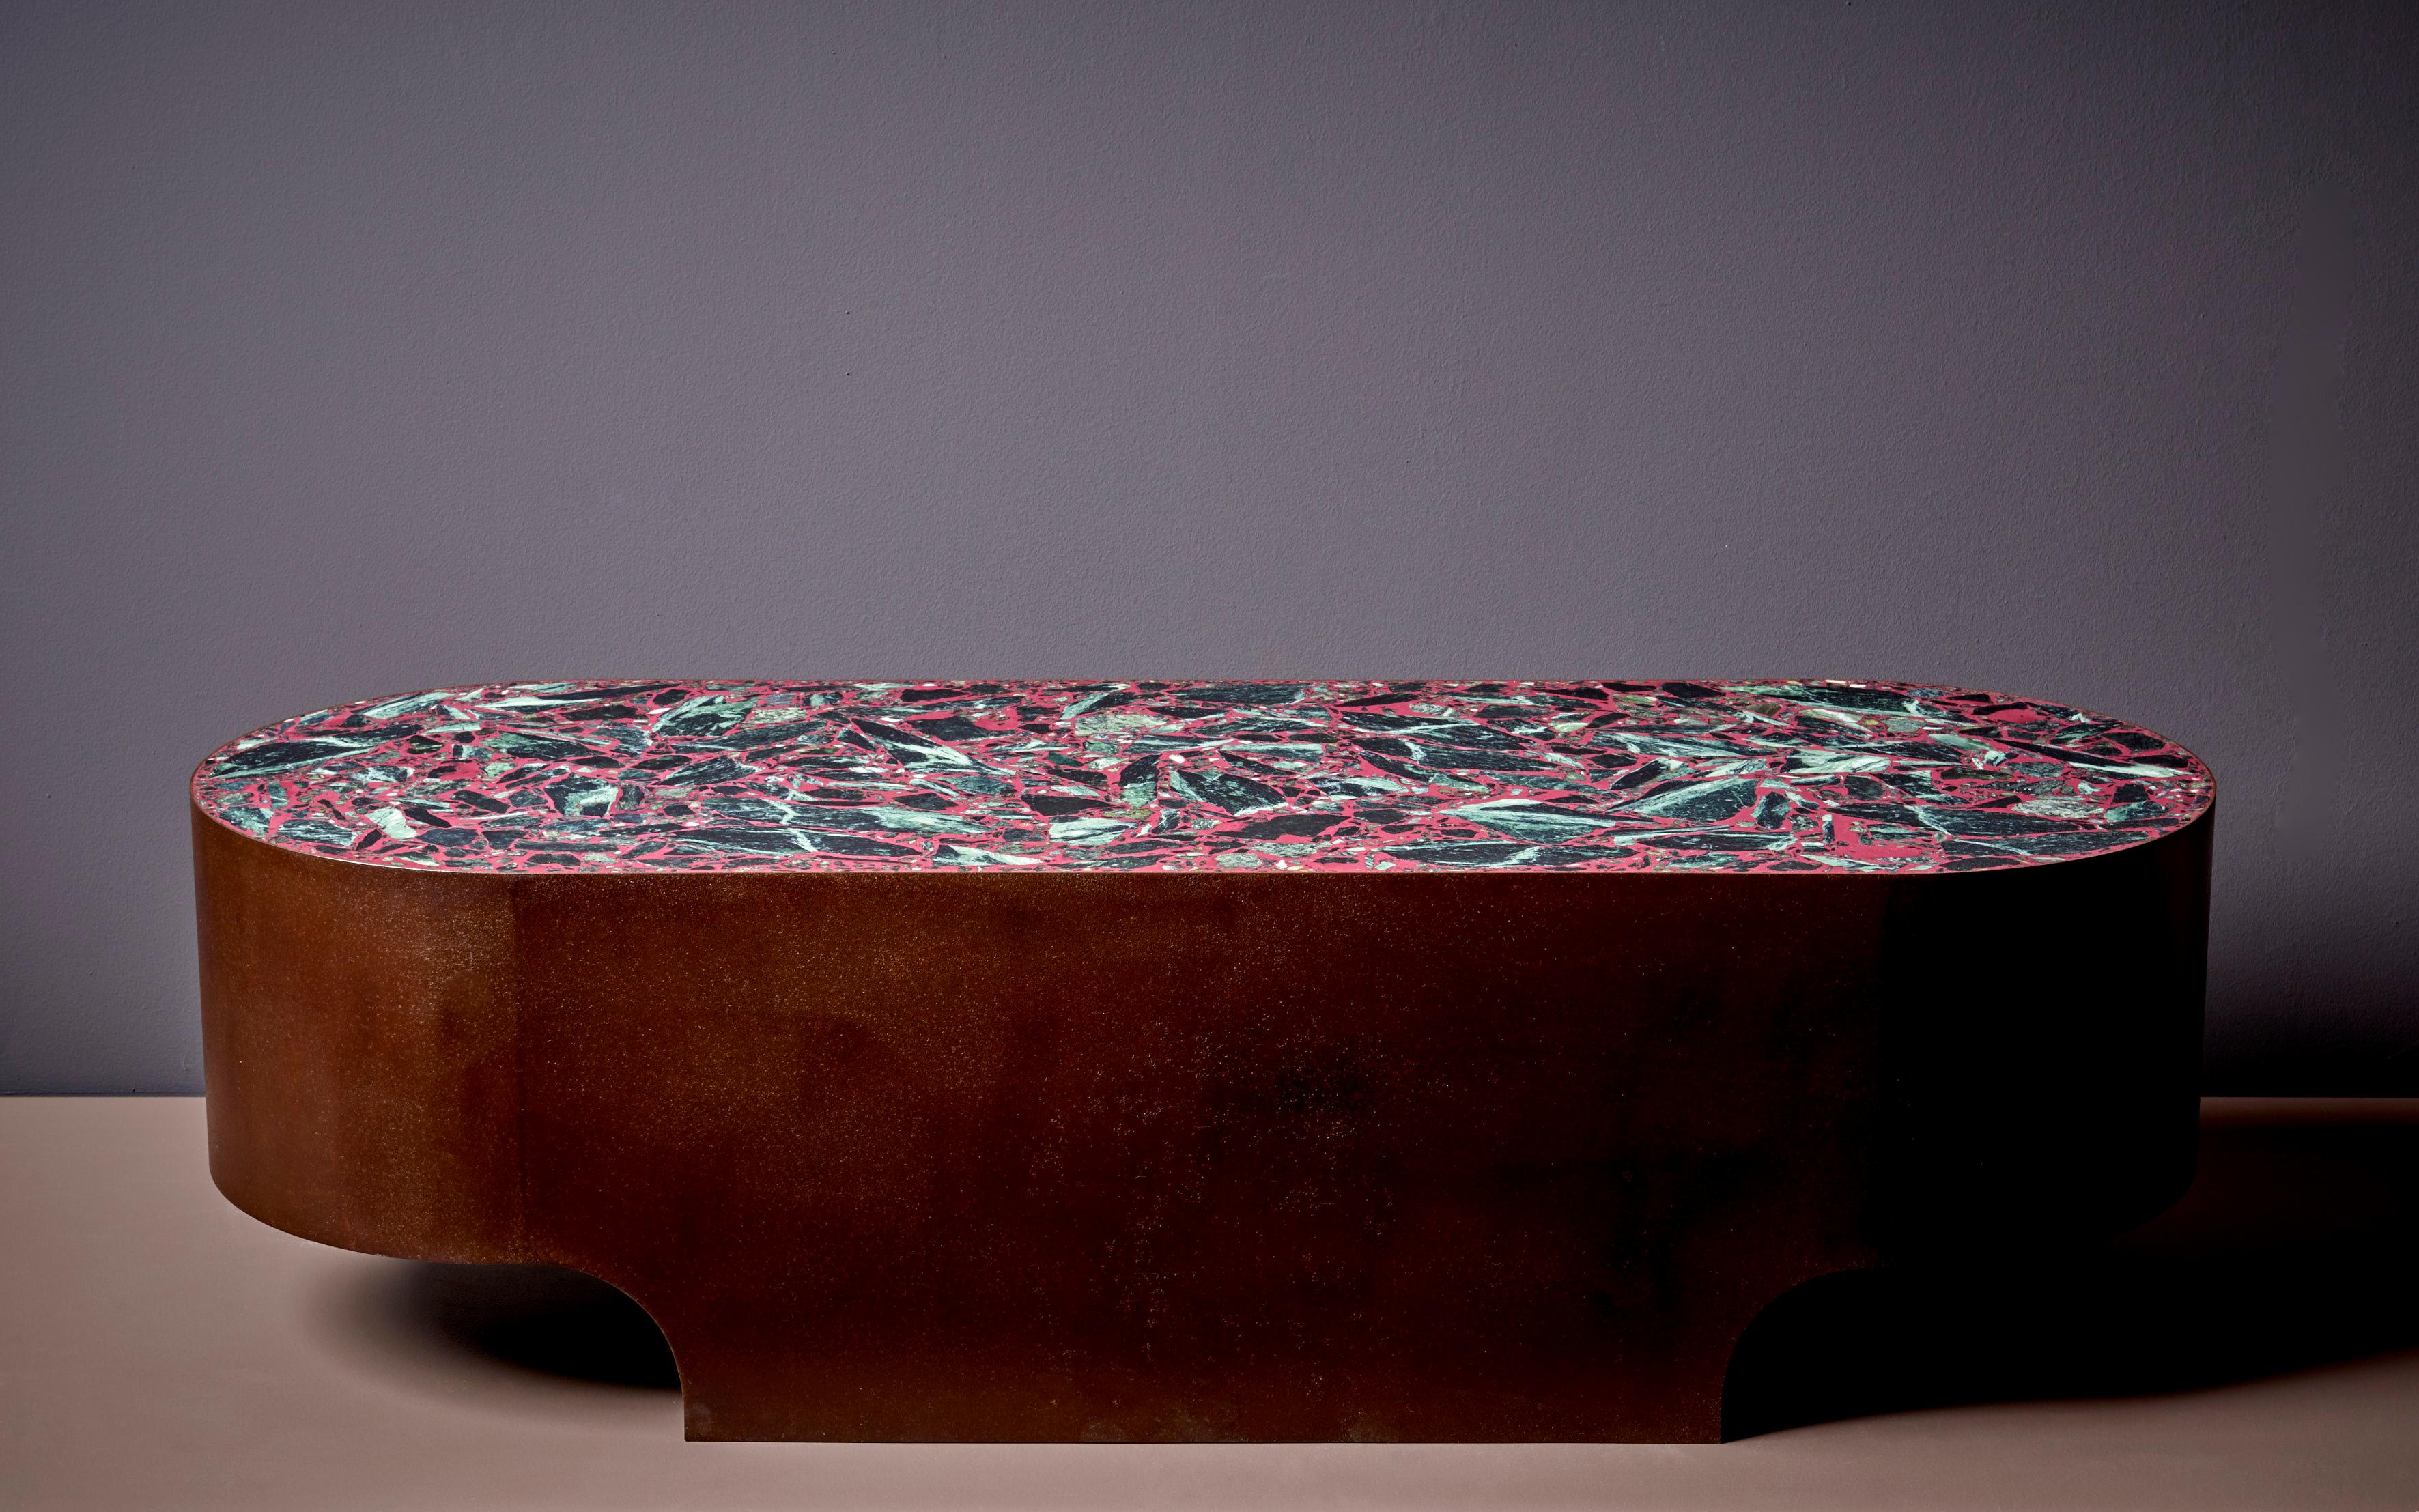 Each item made by Felix Muhrhofer is carefully handcrafted and a unique, one-of-a-kind piece. Muhrhofer is an Austrian designer who primarily works with steel and terrazzo. His pieces, from coffee tables to bar counters, are all made by hand, tested